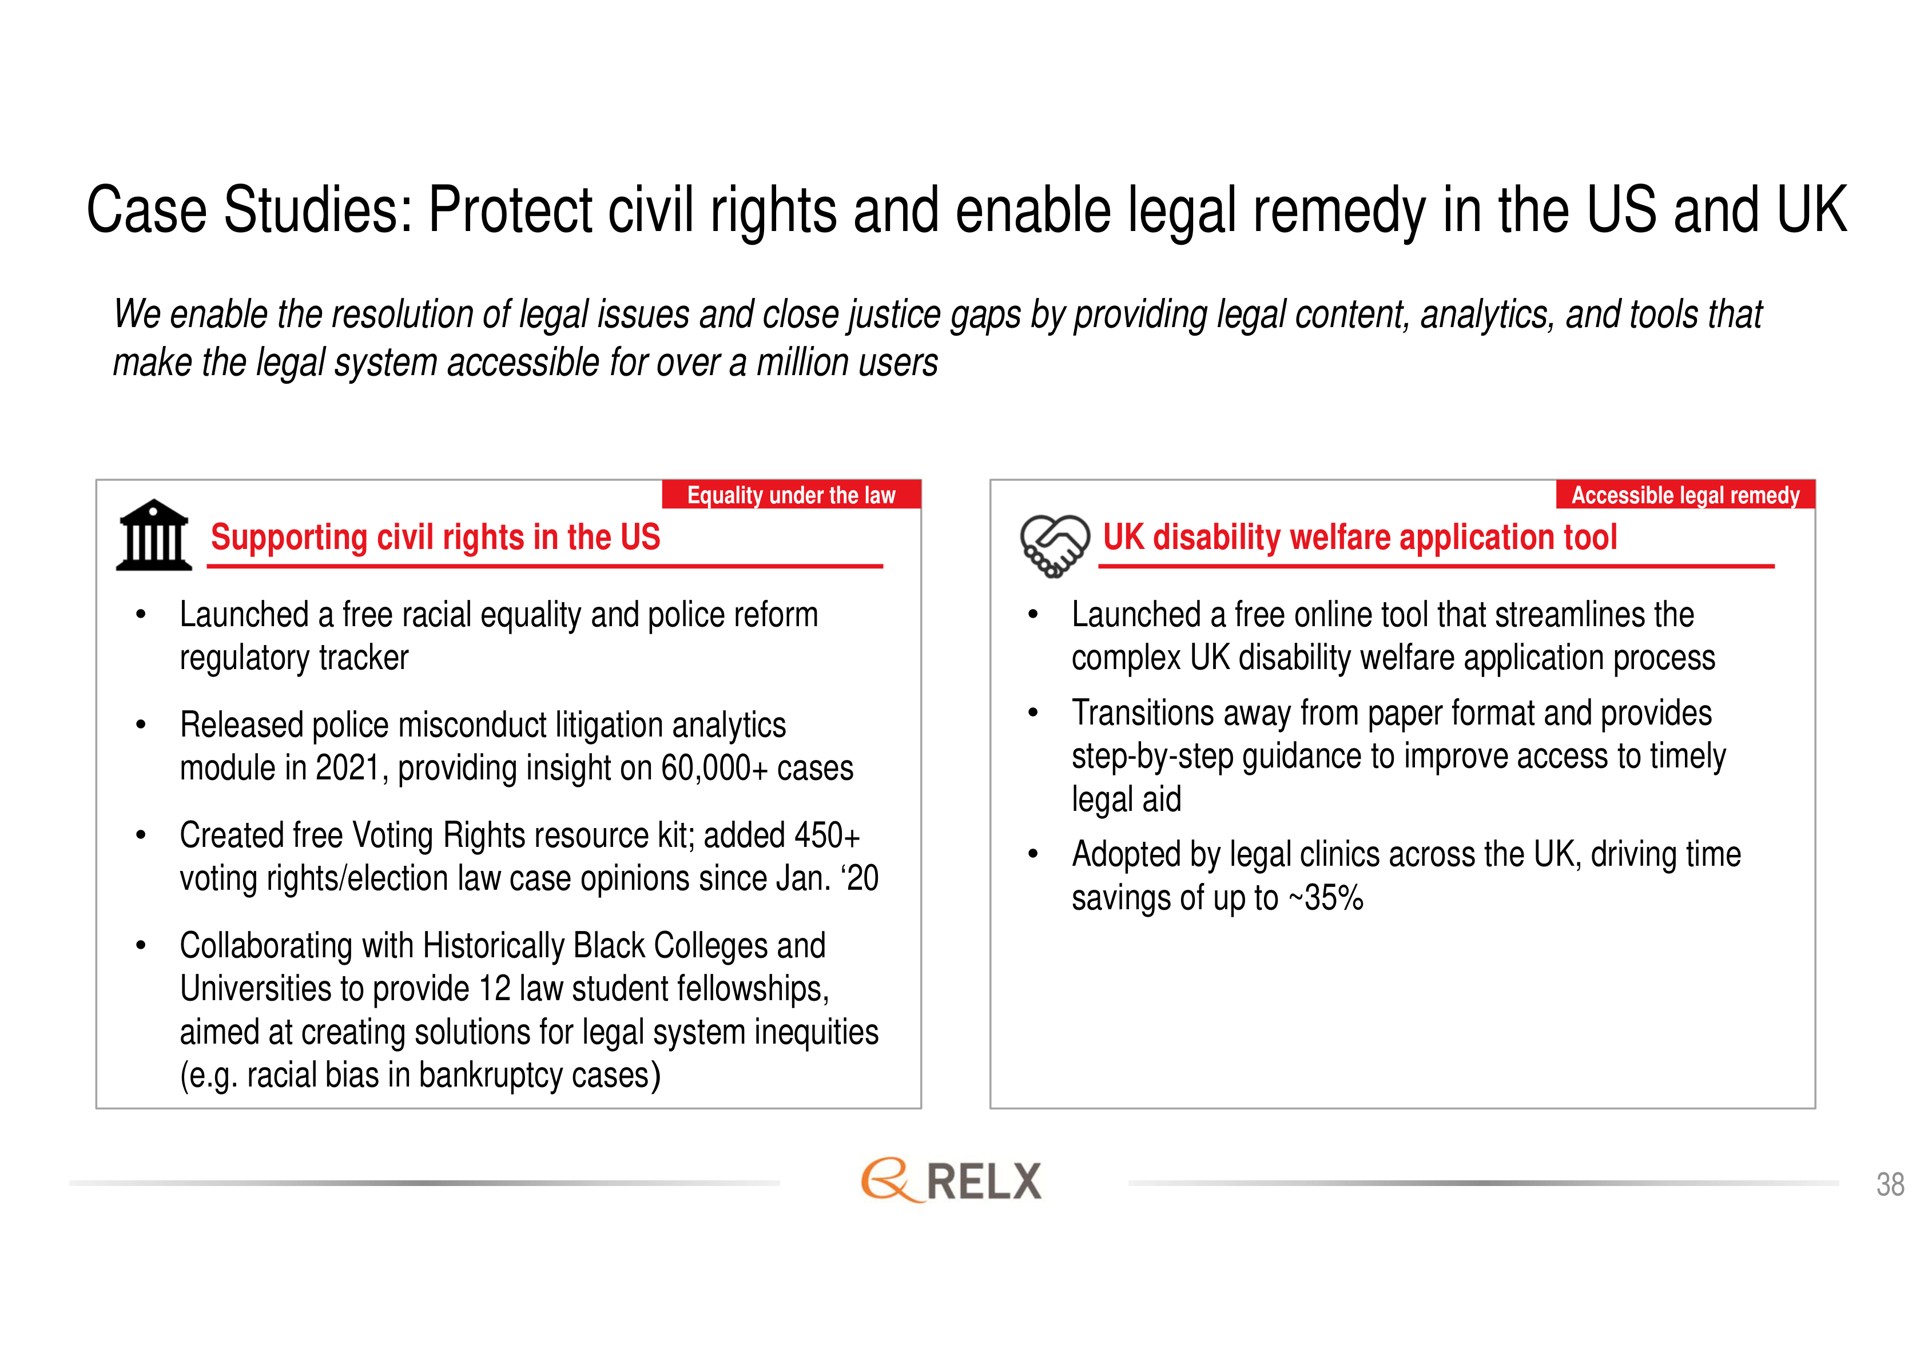 case studies protect civil rights and enable legal remedy in the us and it supporting disability welfare application tool module providing insight on cases step by step guidance to improve access to timely | RELX